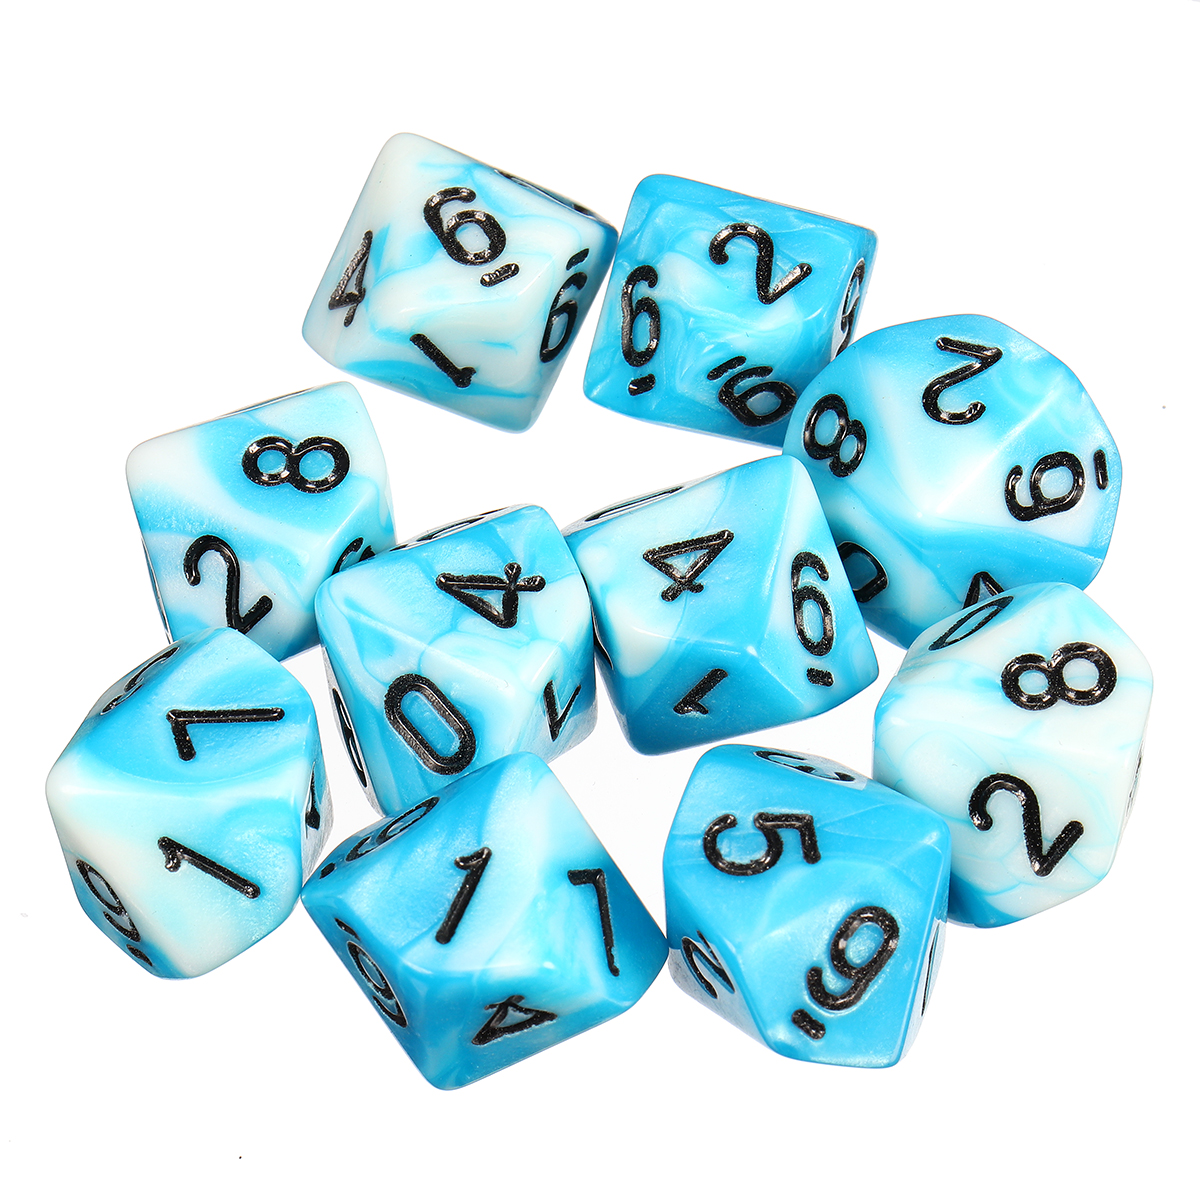 10pcs-10-Sided-Dice-D10-Polyhedral-Dice-RPG-Role-Playing-Game-Dices-w-bag-1351752-3